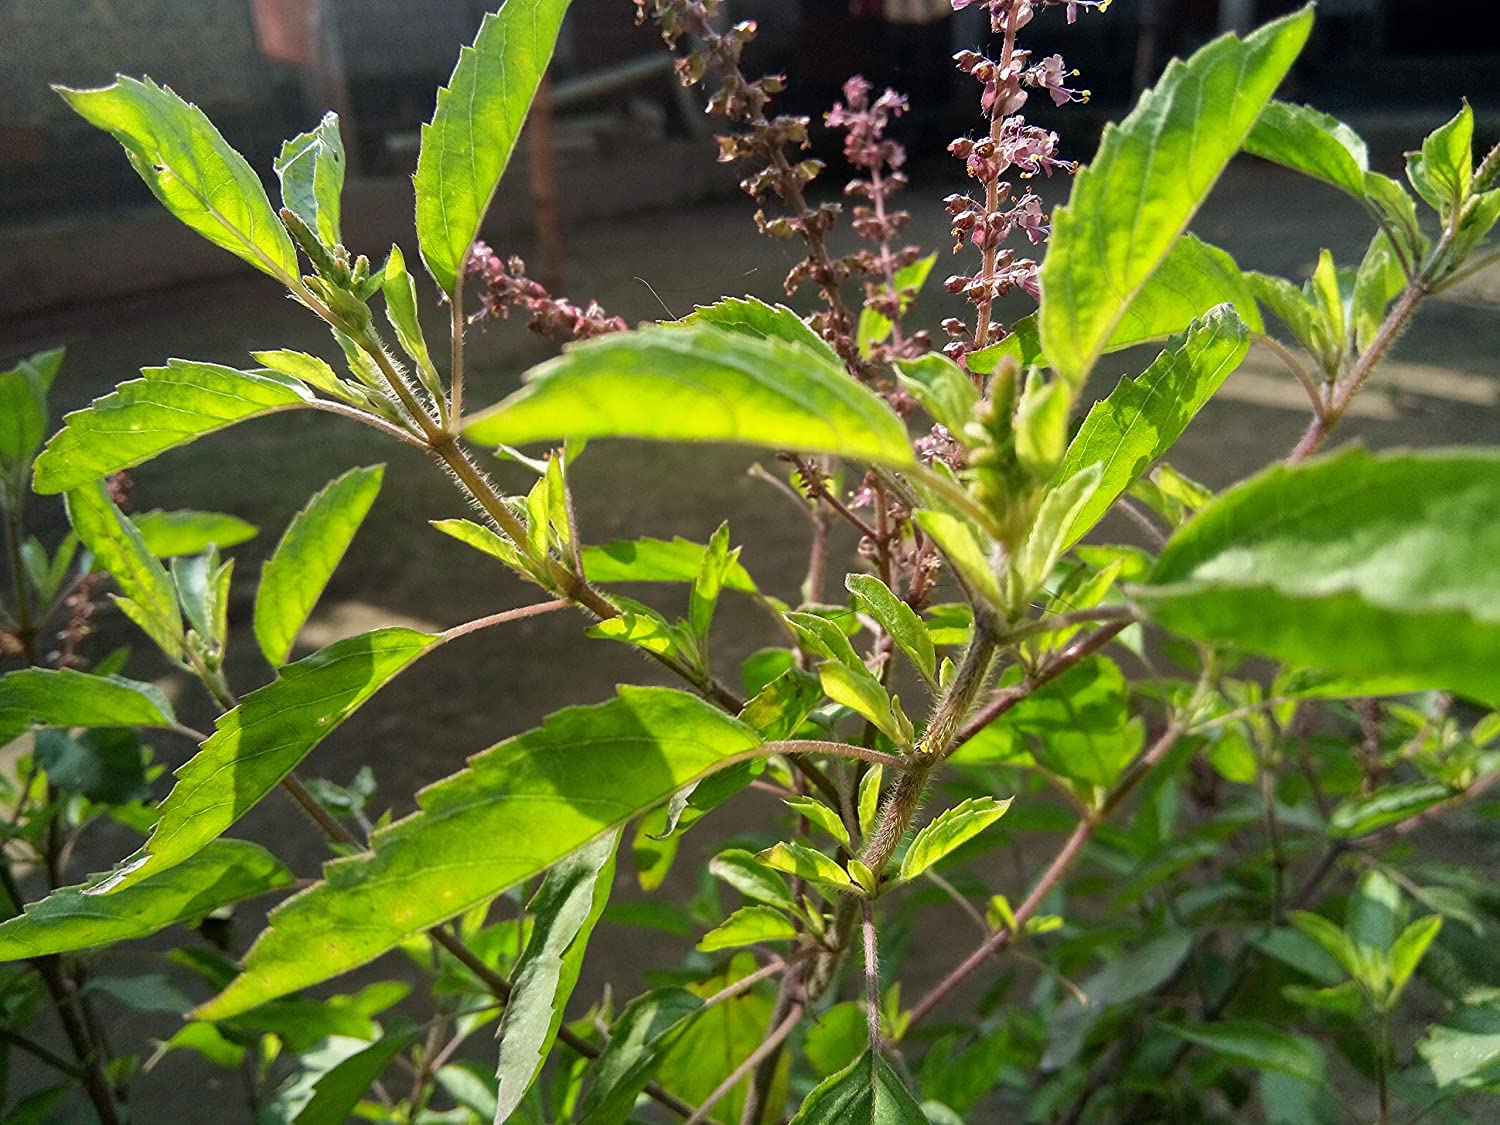 Organic Tulsi Leaf / Holy Basil Powder - Ocimum sanctum - The plant has a purifying influence by liberating ozone and also repelling mosquitoes.  Its healing properties are so well established that most people in India grow it in courtyards and traditionally worshipped daily in a ritual for the well-being of the family.